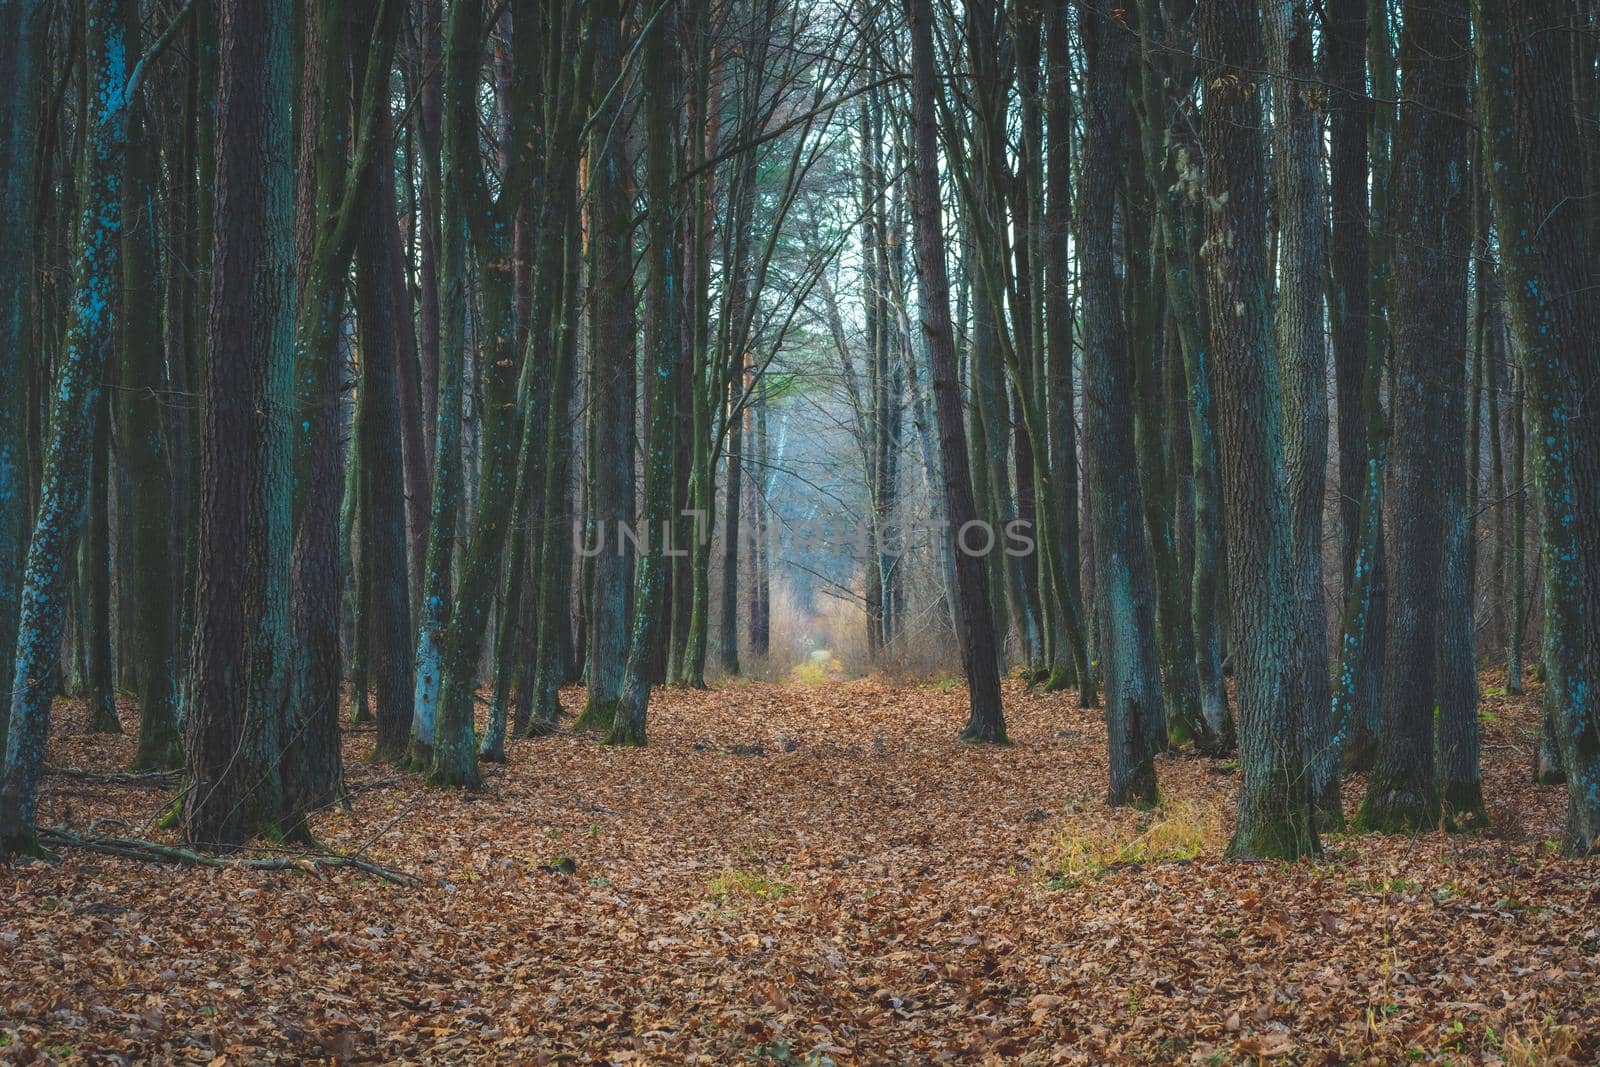 Avenue with leaves in a moody forest by darekb22